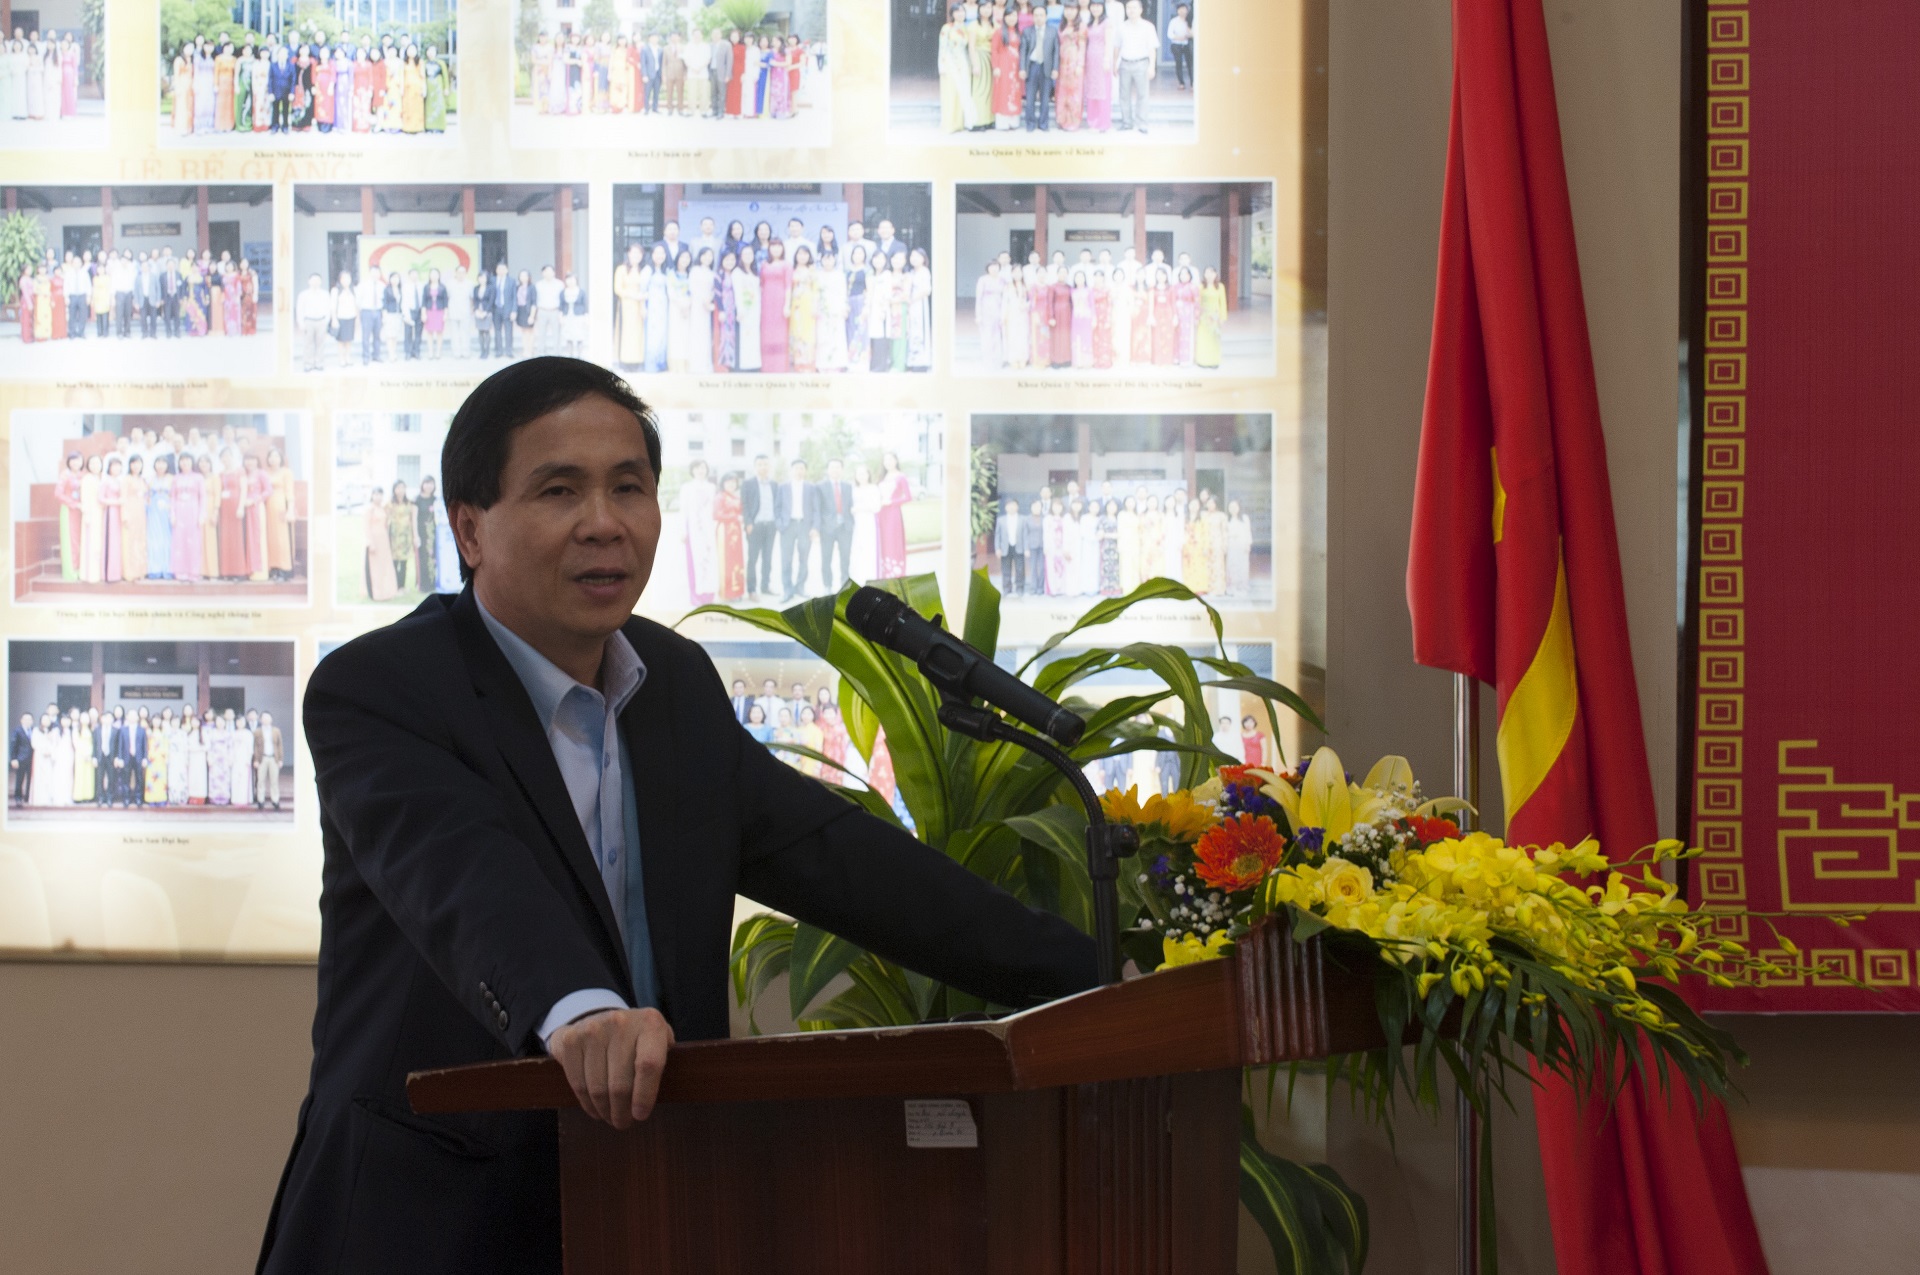 Assoc. Prof. Dr. Trieu Van Cuong, Vice Minister of Home Affairs giving a speech in the ceremony